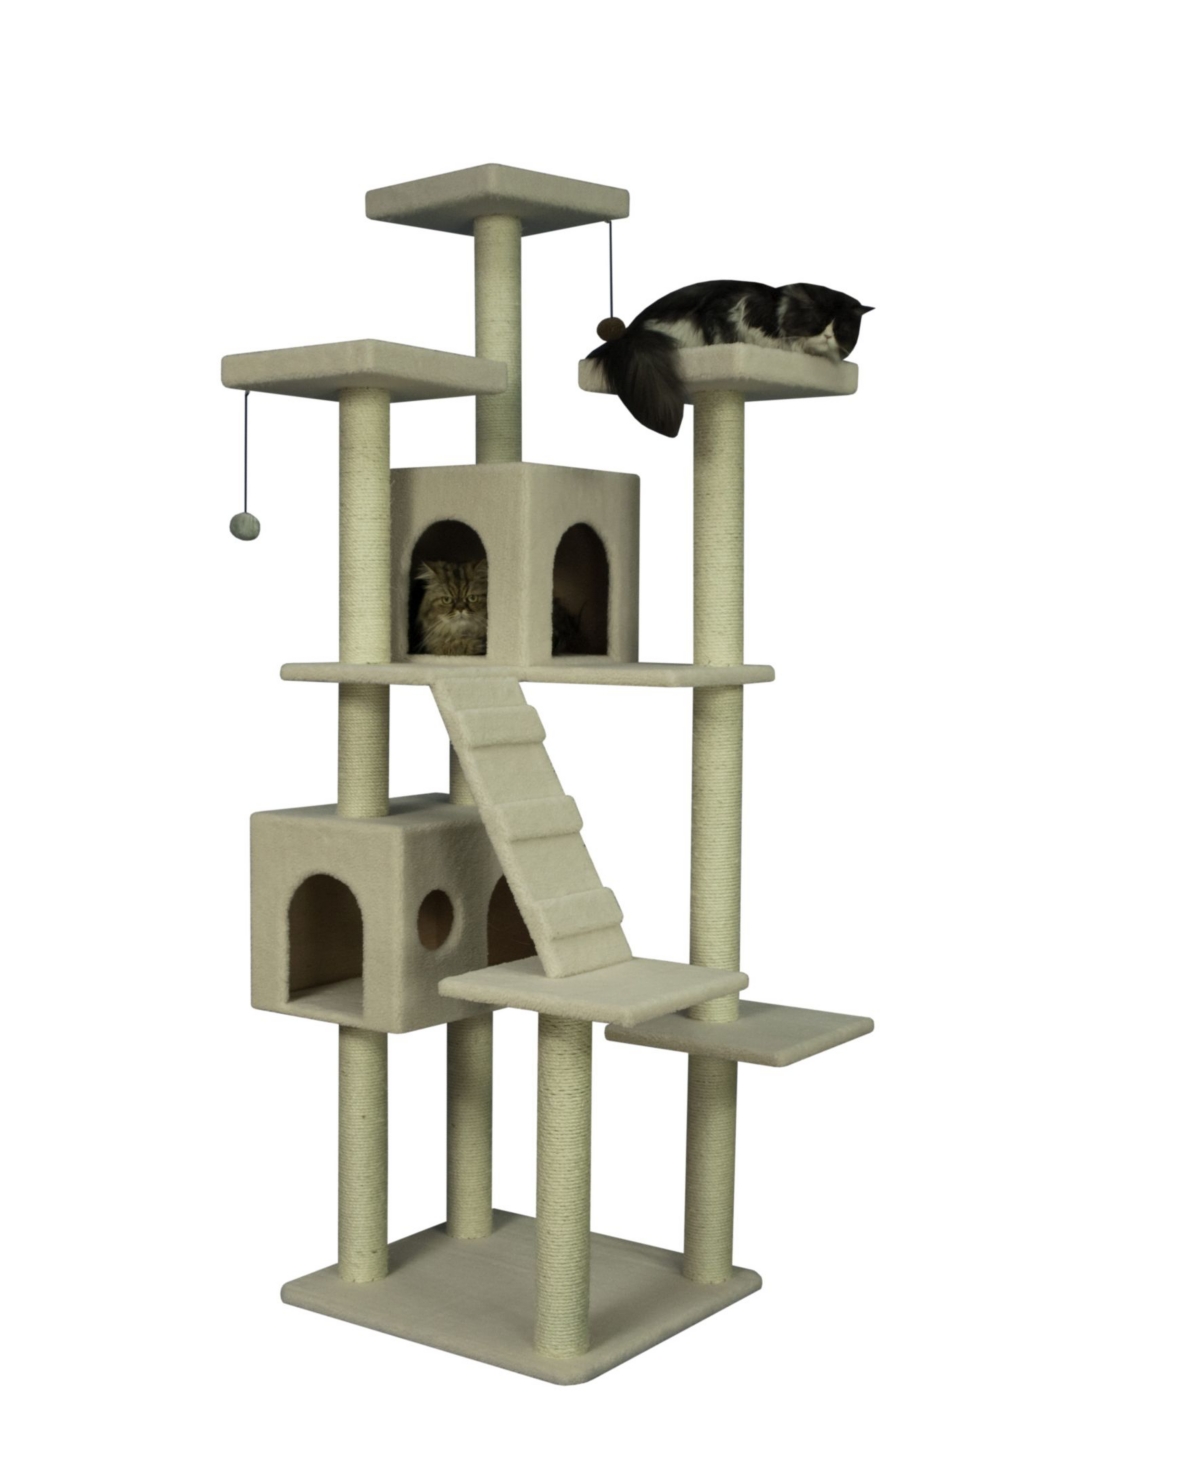 Real Wood Cat Tree, Multi Levels With Ramp, 3 Perches & 2 Condos - Ivory